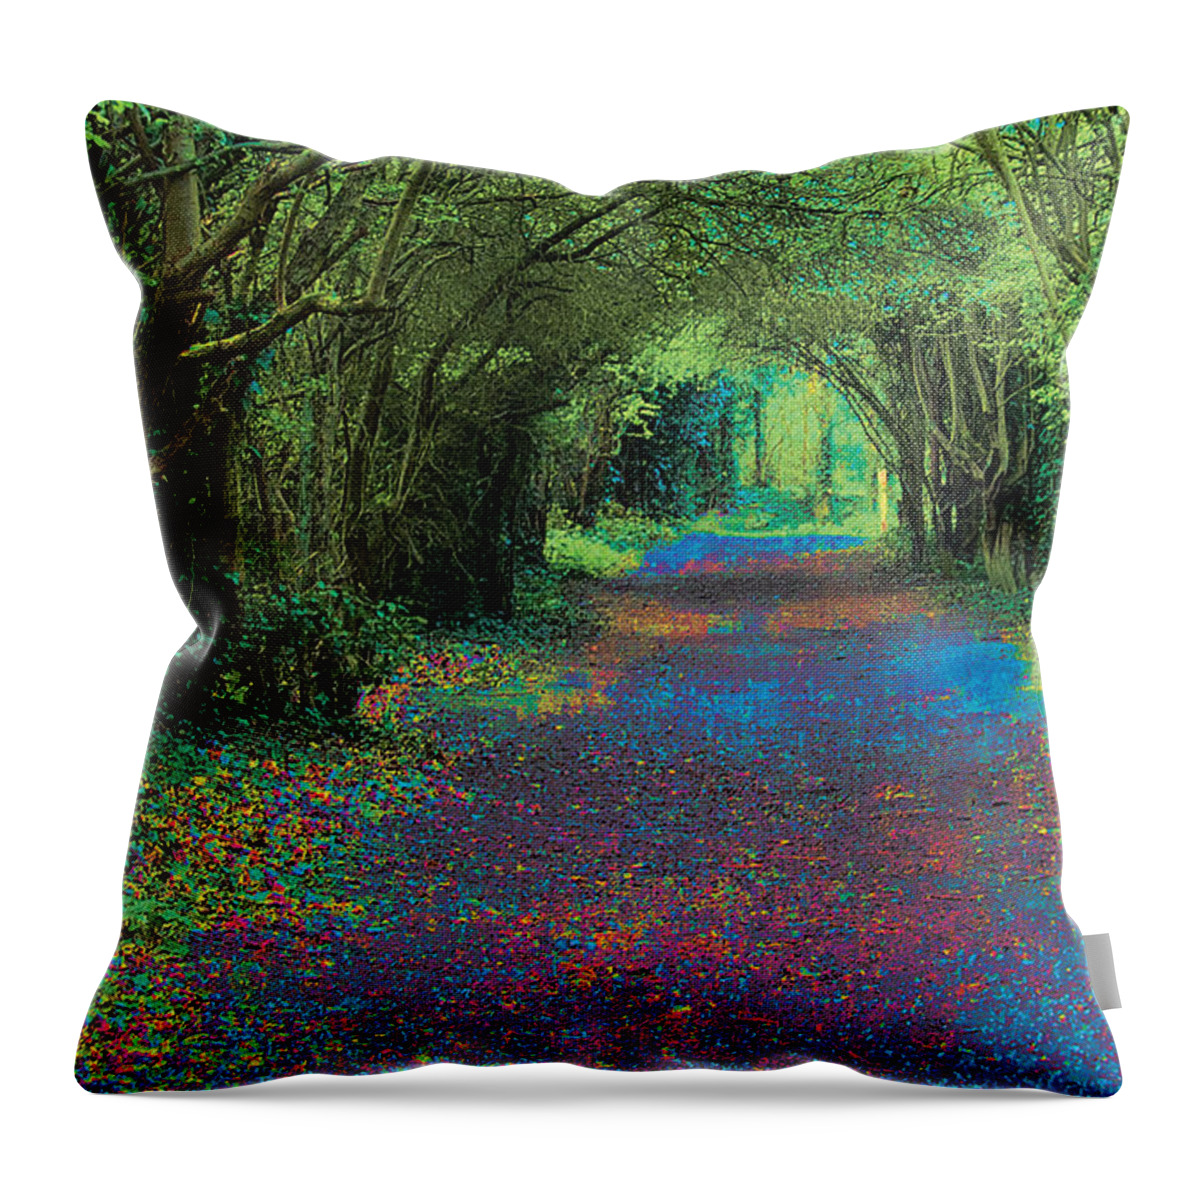 Footpath Photographs Throw Pillow featuring the photograph Rush Avenue by David Davies